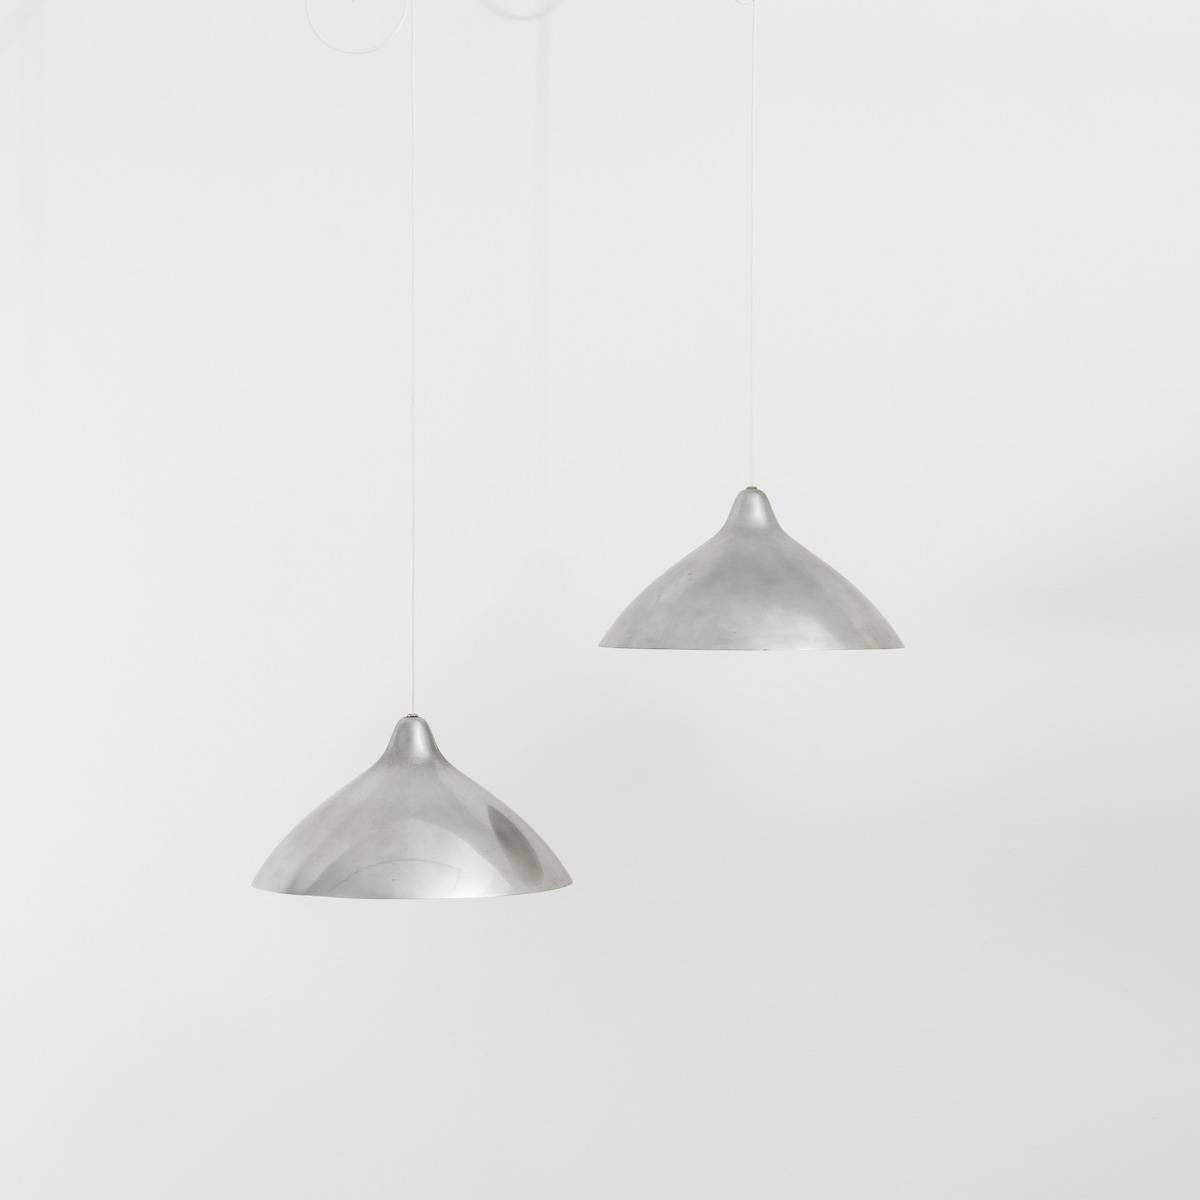 Considered one of the most significant finnish lighting designers of the second half of the 20th century Johansson-Pape’s priorities were first function then the aesthetic. This lamp is intended to be hung low over a dining table or in the corner of